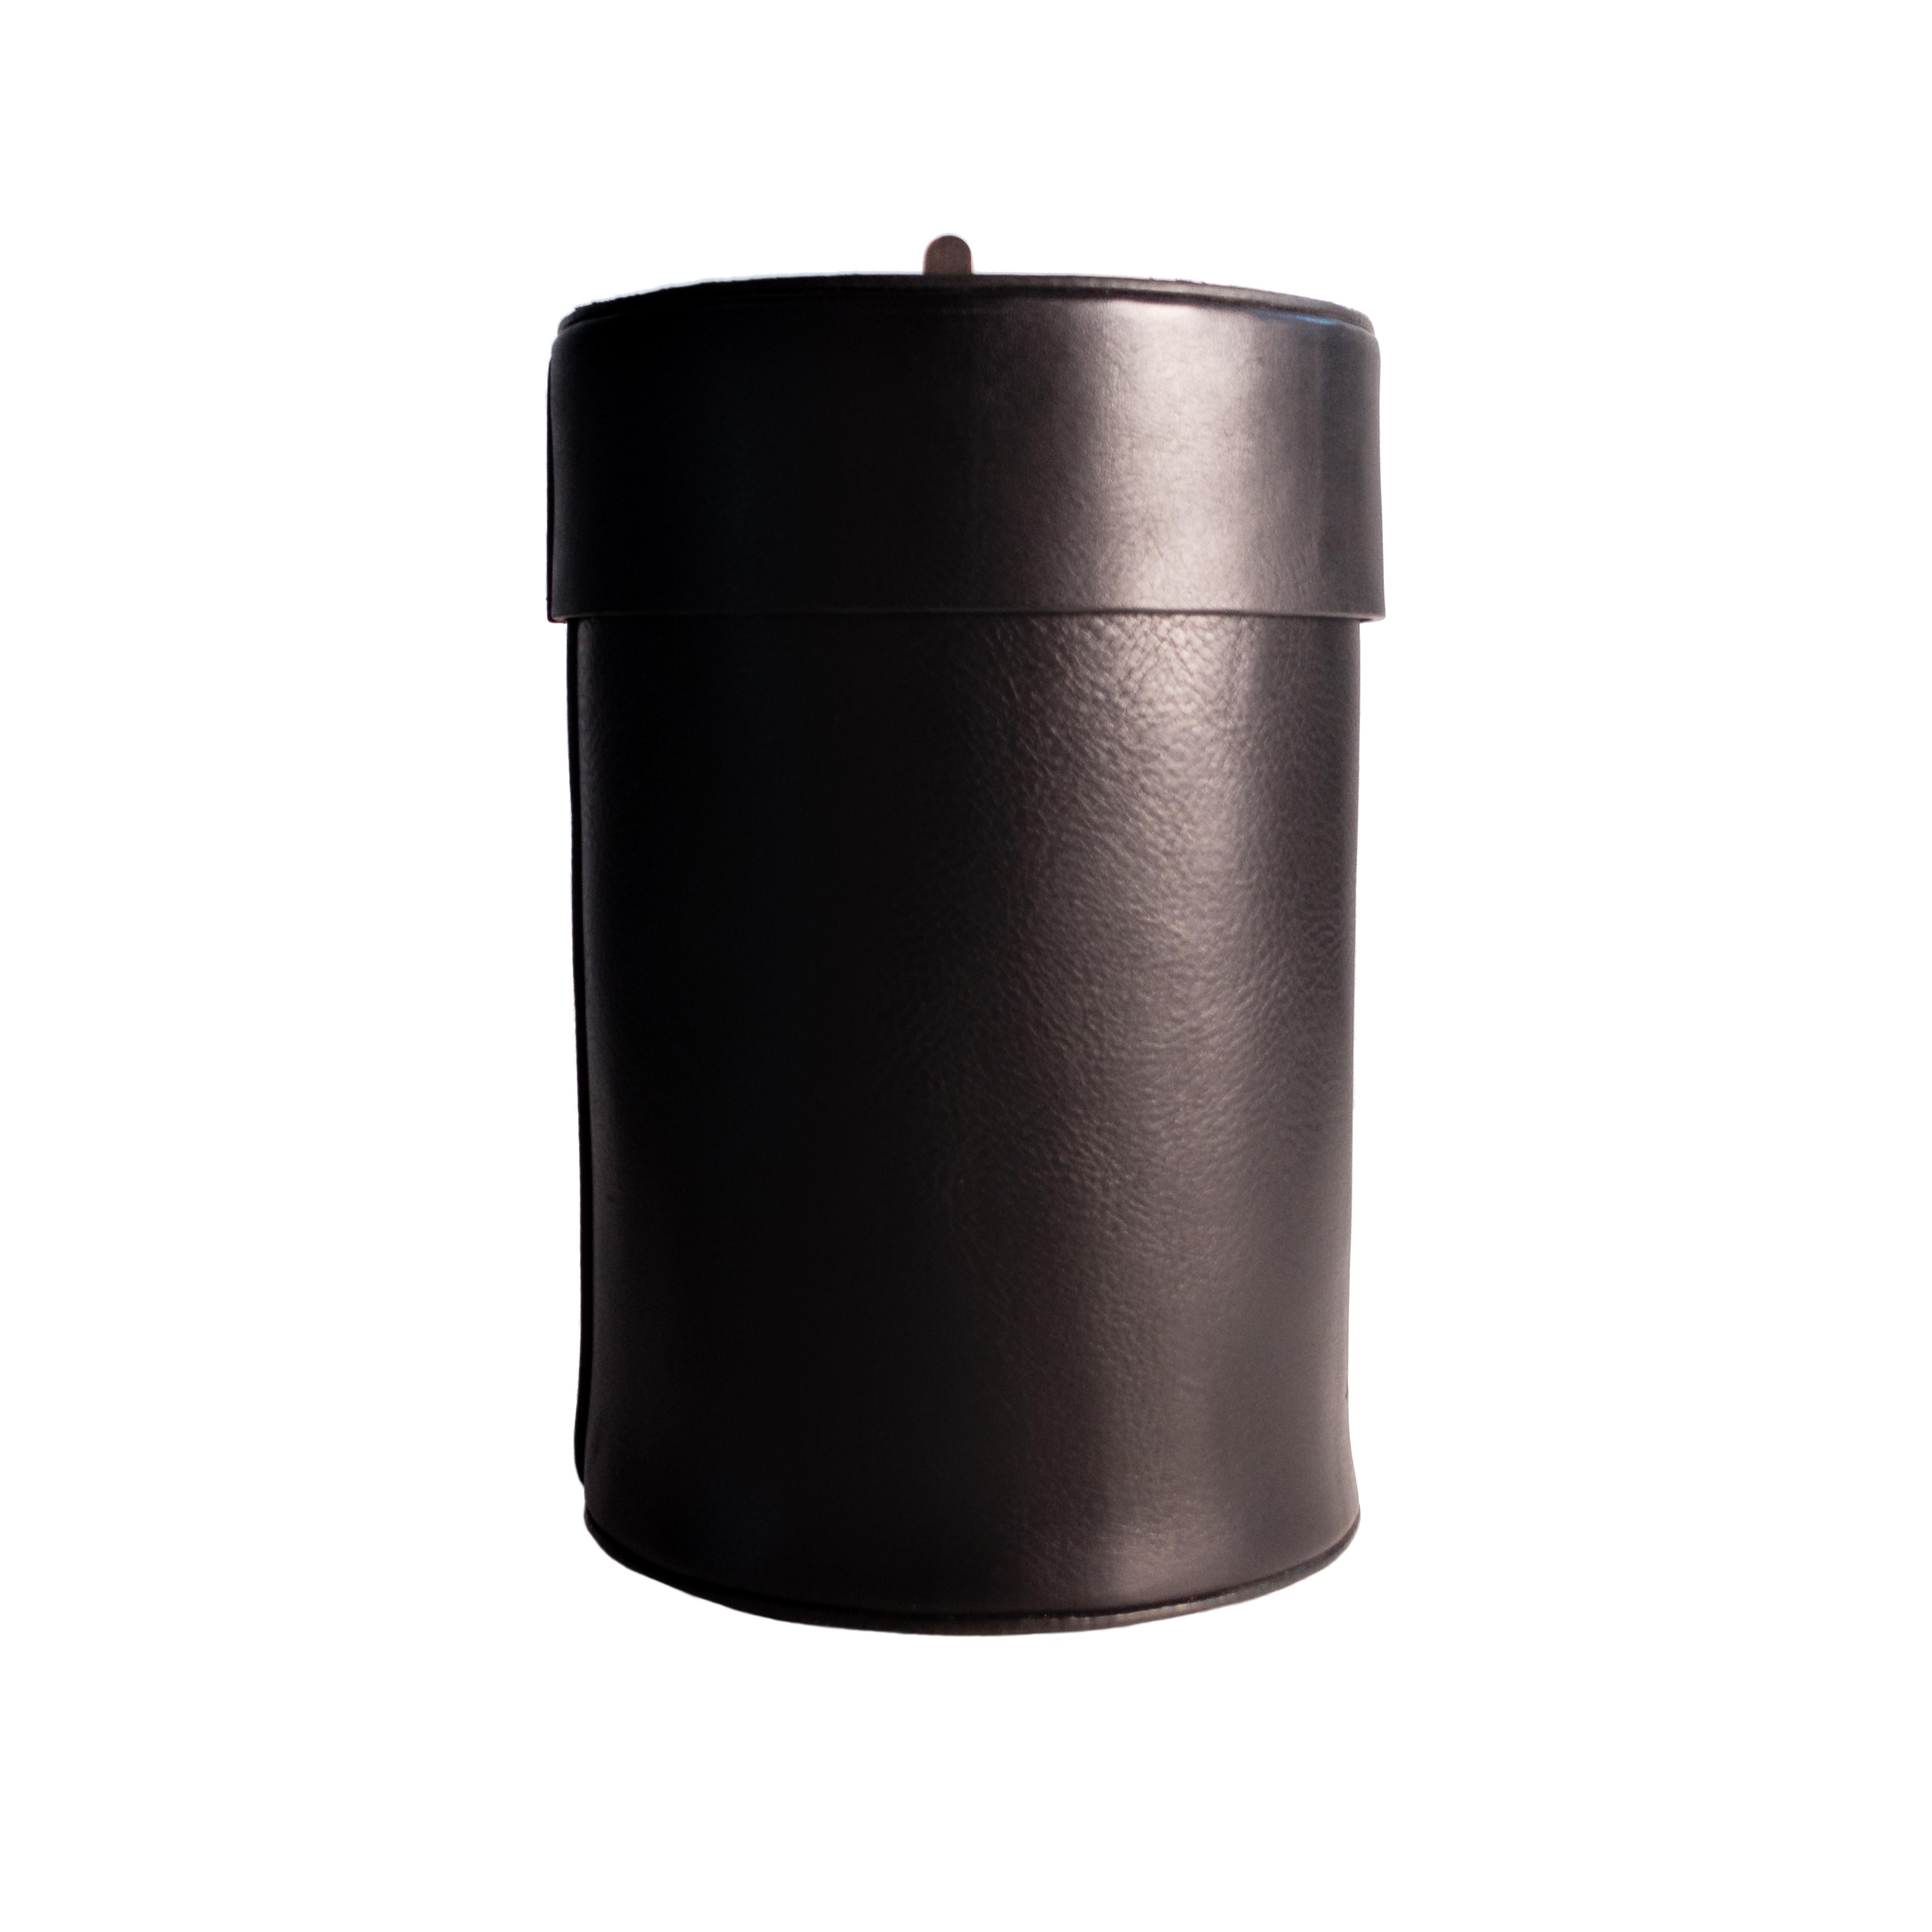 Luxury Paper Bin Handcrafted in Black Cowhide Leather with Brass Details